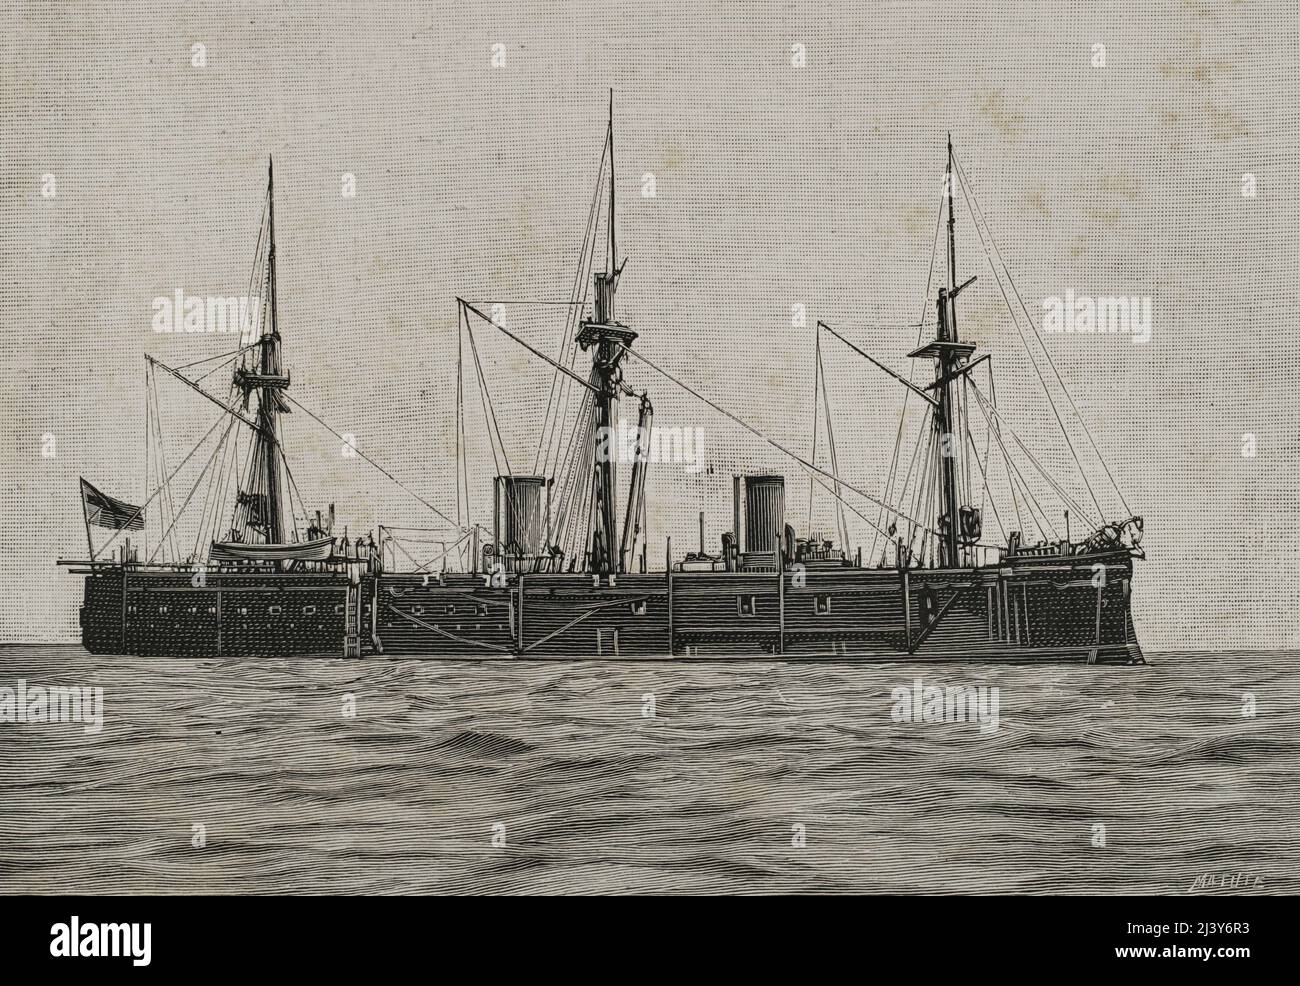 The German East Asia Squadron. China. The Imperial German Navy battleship, Kaiser class, SMS Deutschland (1875-1904). It was assigned to the East Asia Squadron for three years. Engraving by Matute. La Ilustración Española y Americana, 1898. Stock Photo